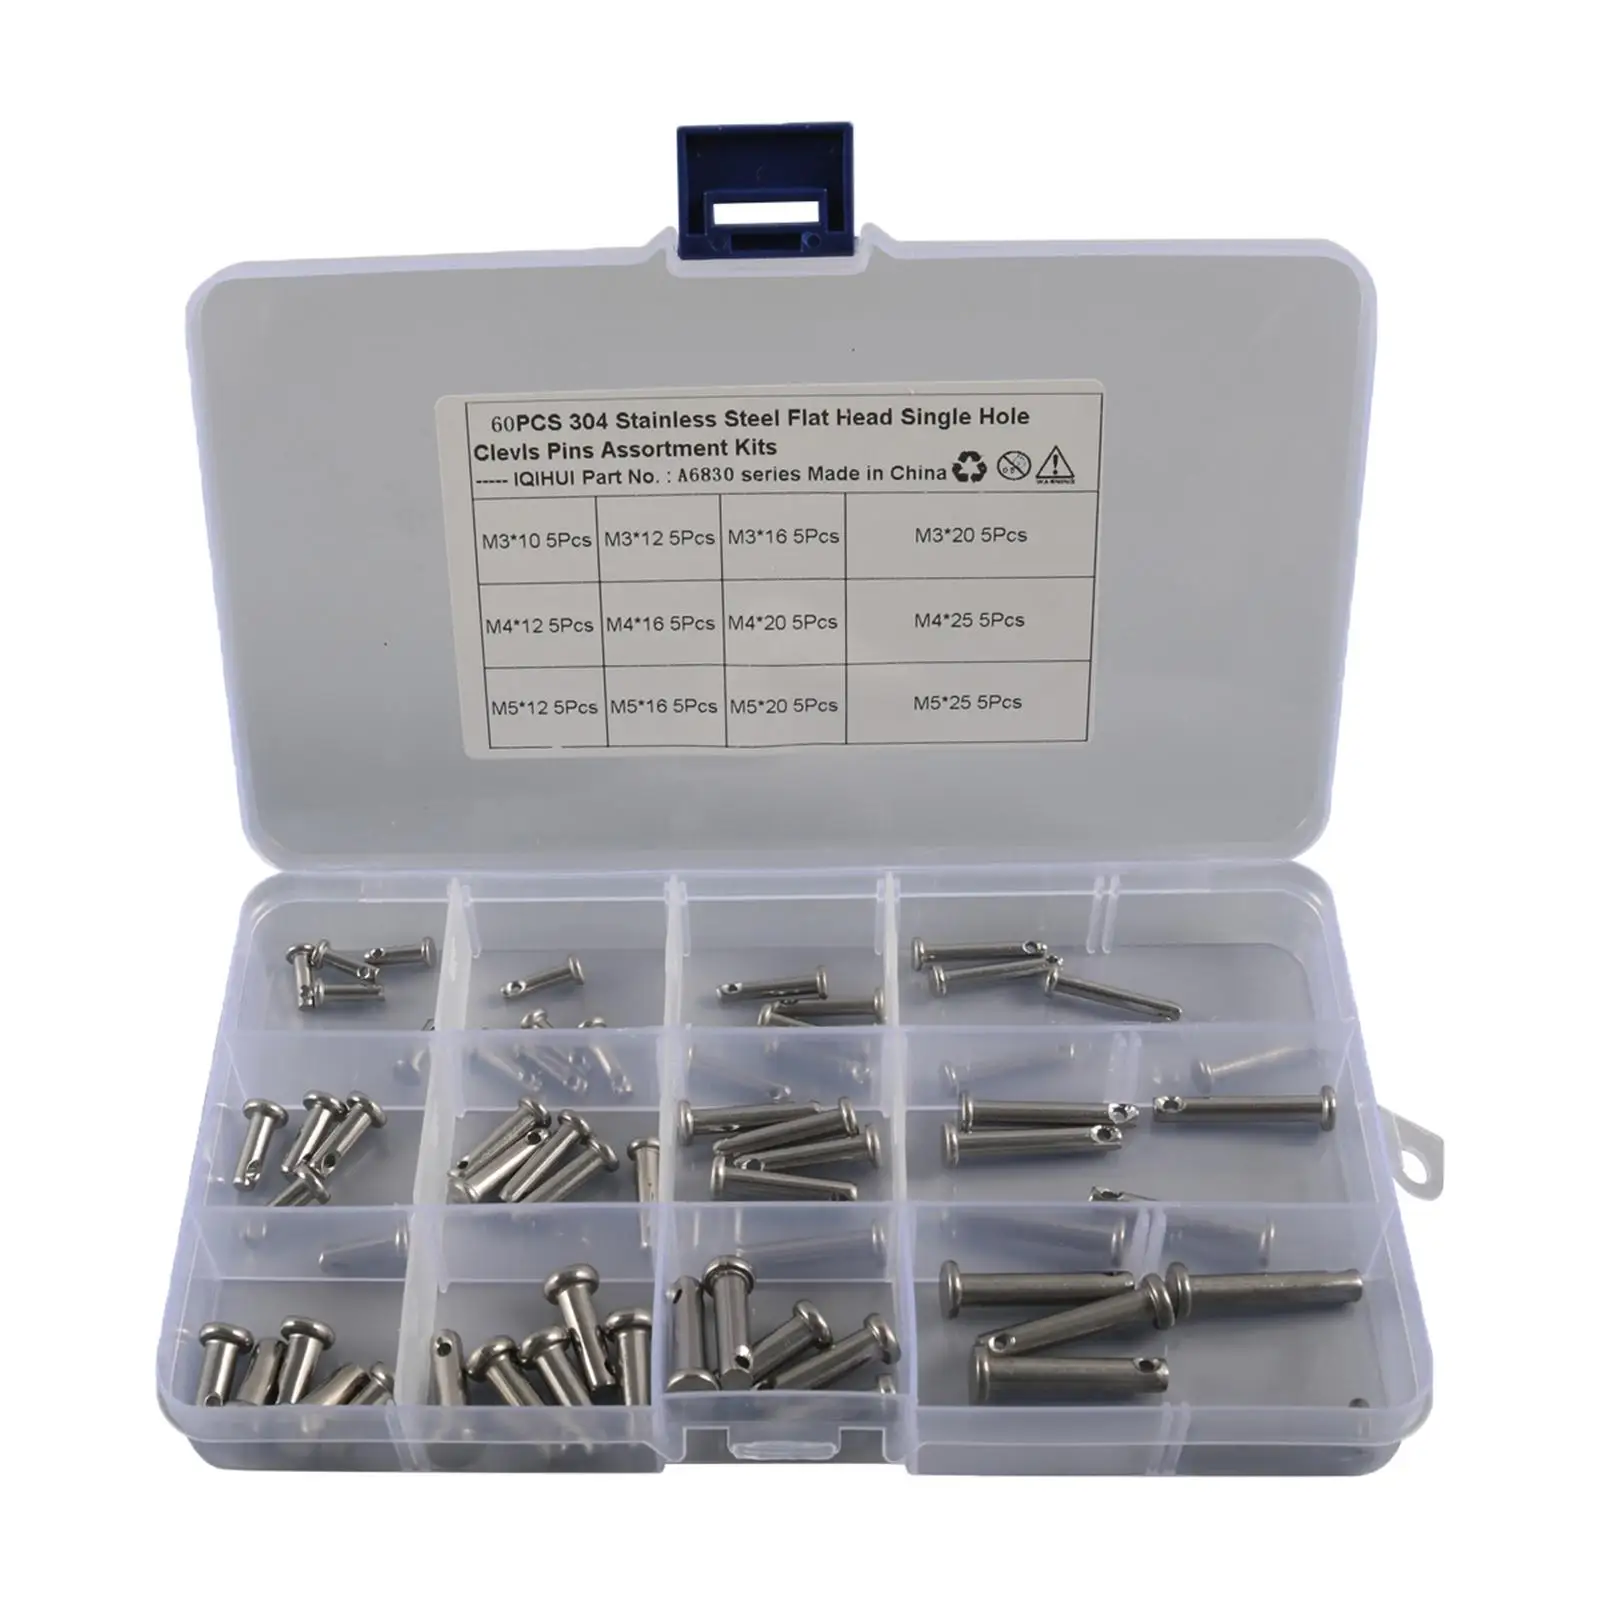 60x Clevis Pins Assortment Kit T Shape Round Pin Flat Head Pin Single Hole M3 M4 M5 12 Type Fits for Furniture Installation